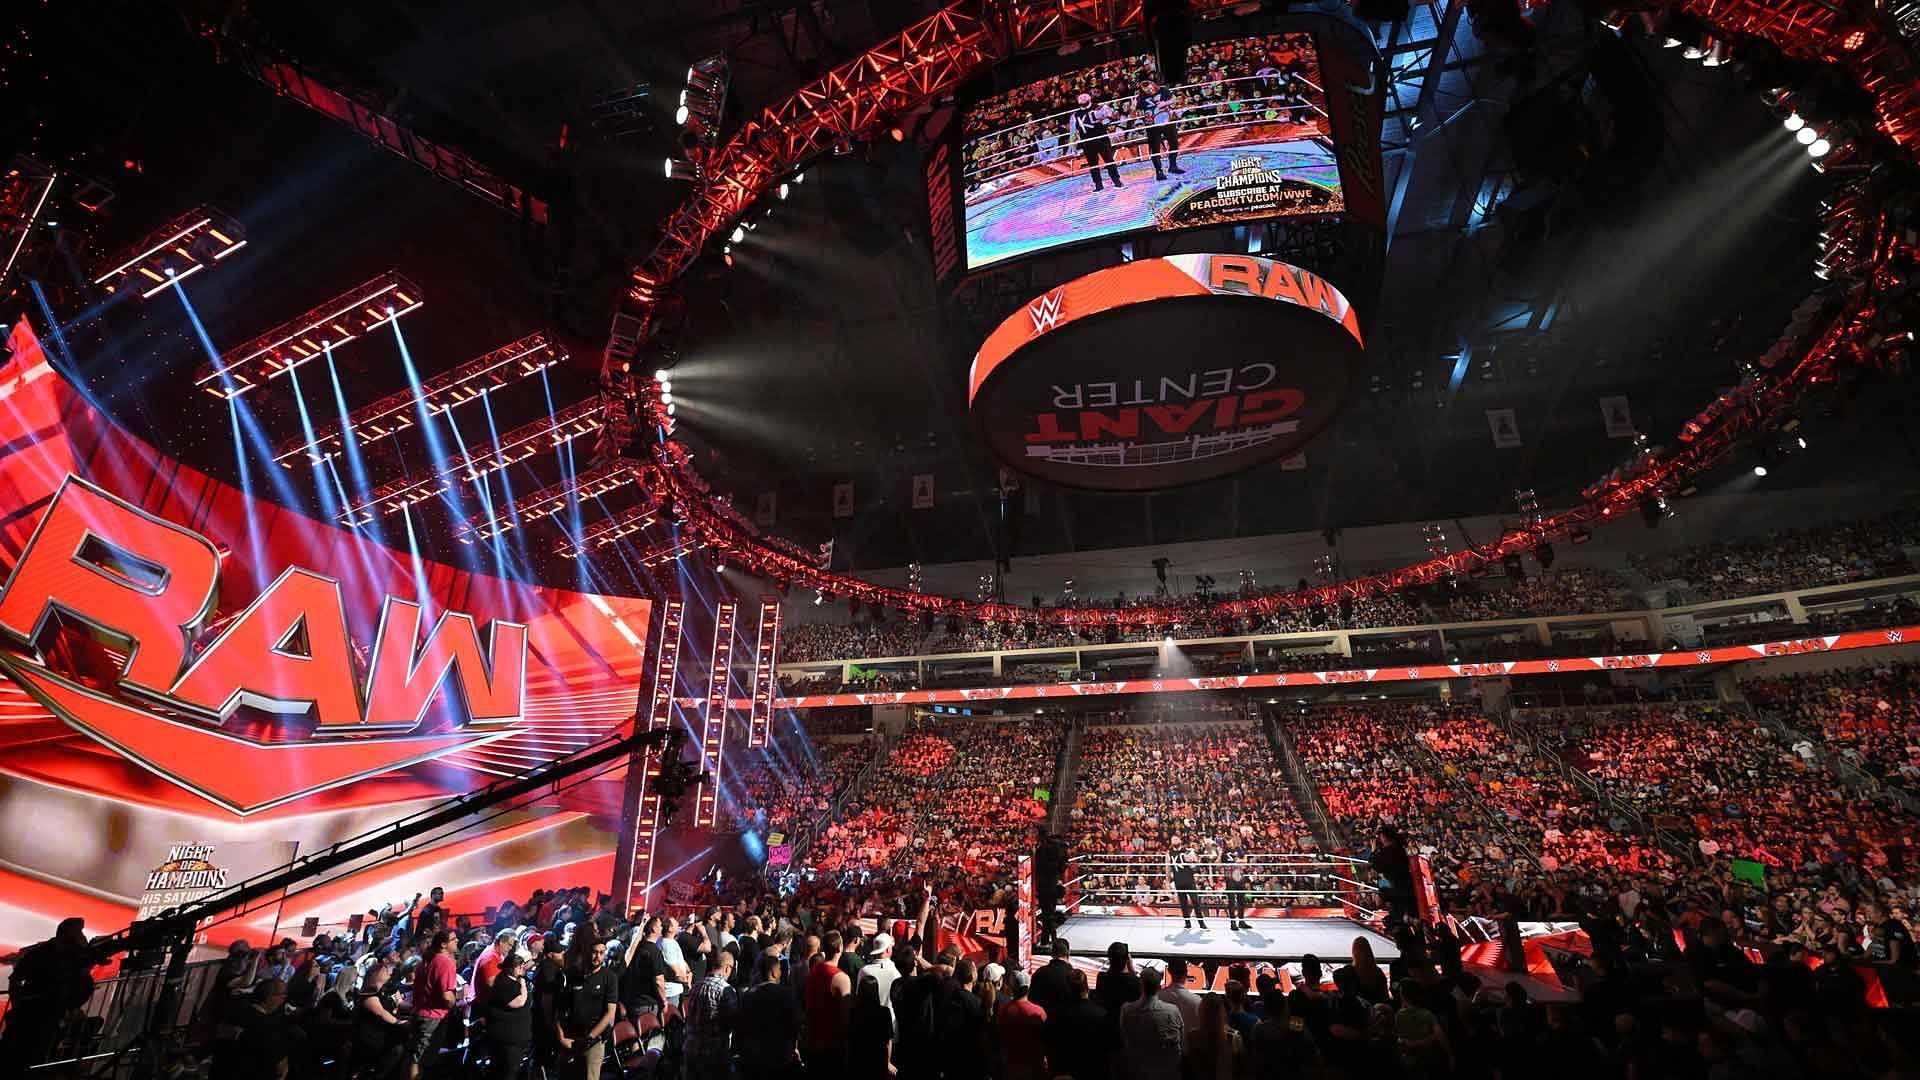 The WWE RAW ring and stage/set on display inside a packed arena